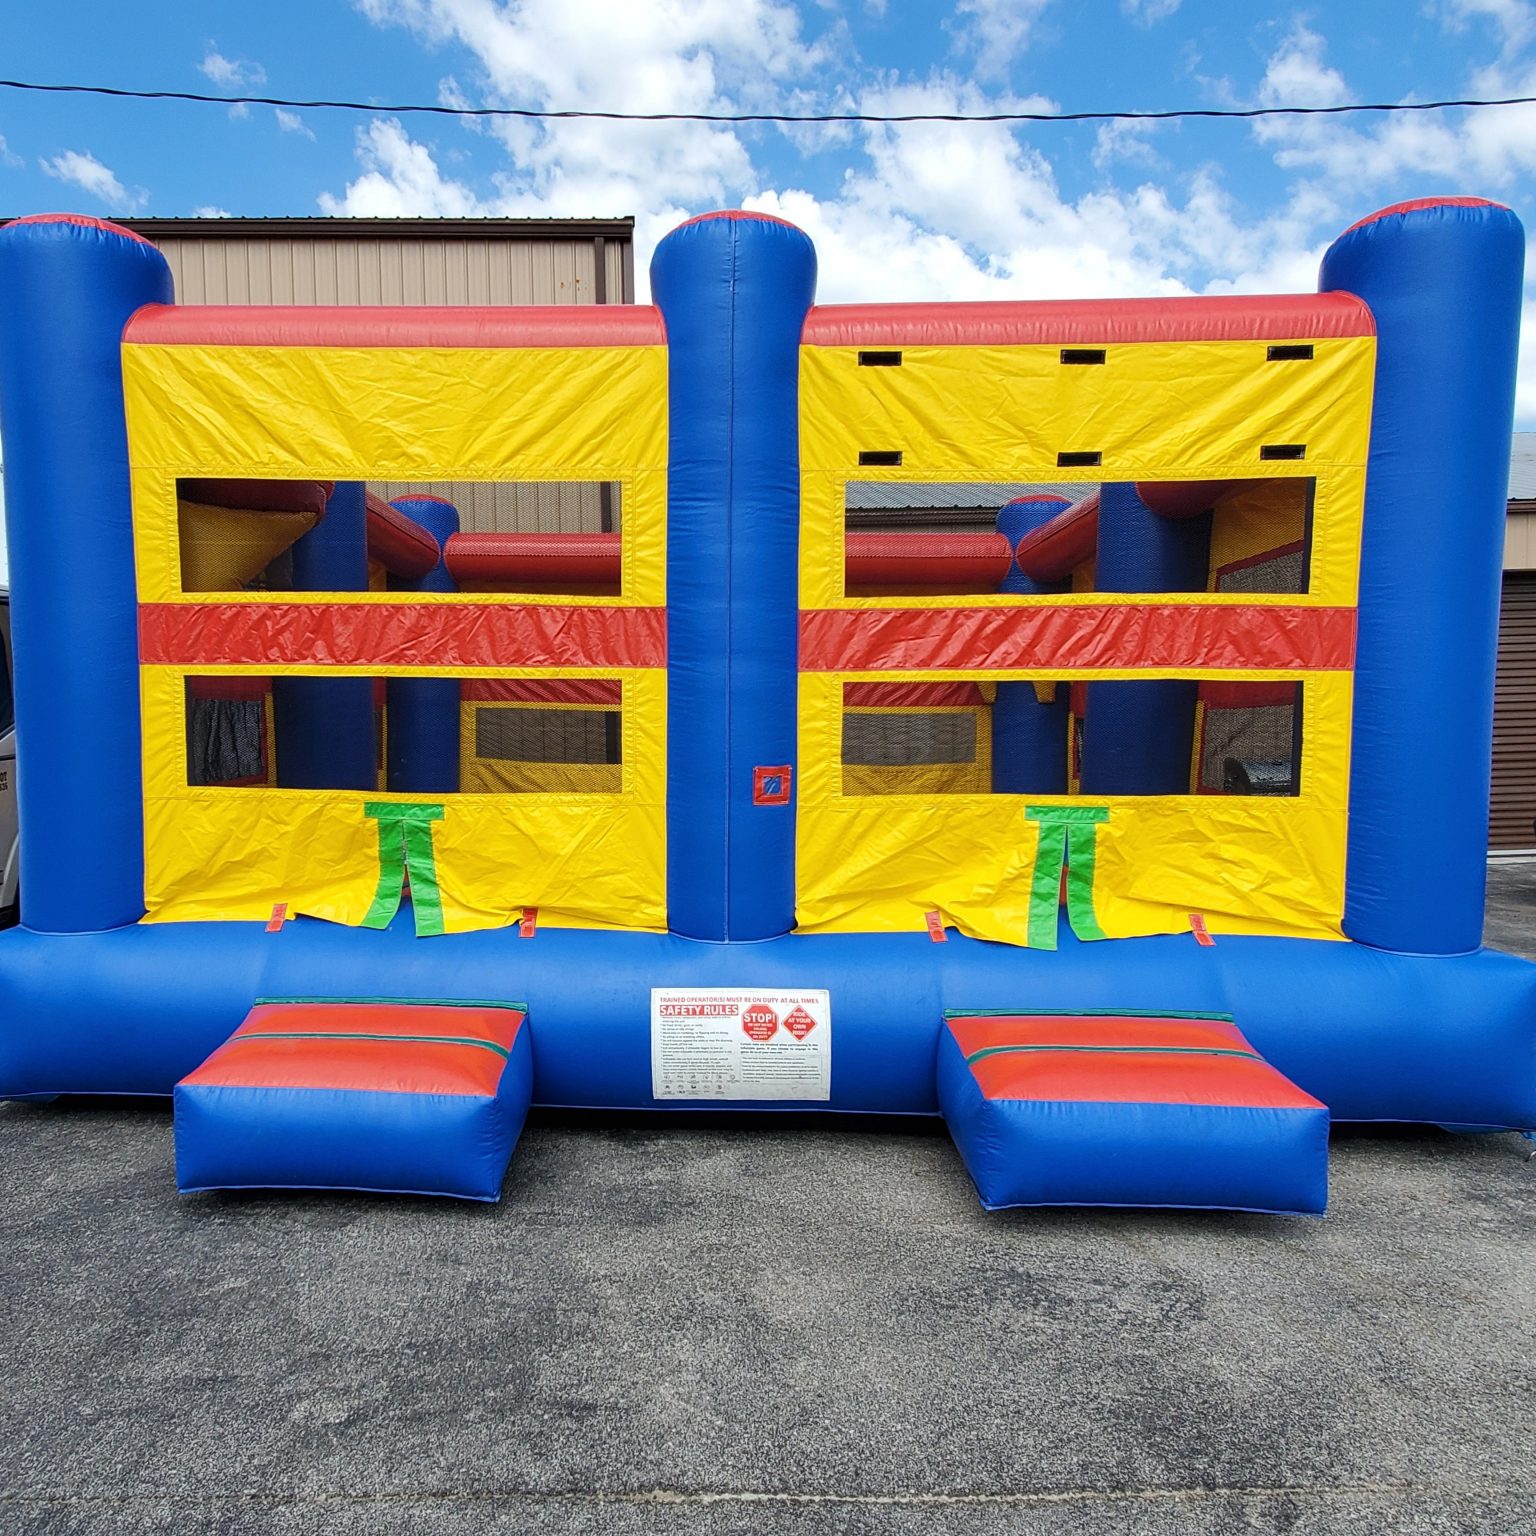 5 in 1 Extreme Arena Rental - STL Interactives Events & Rentals